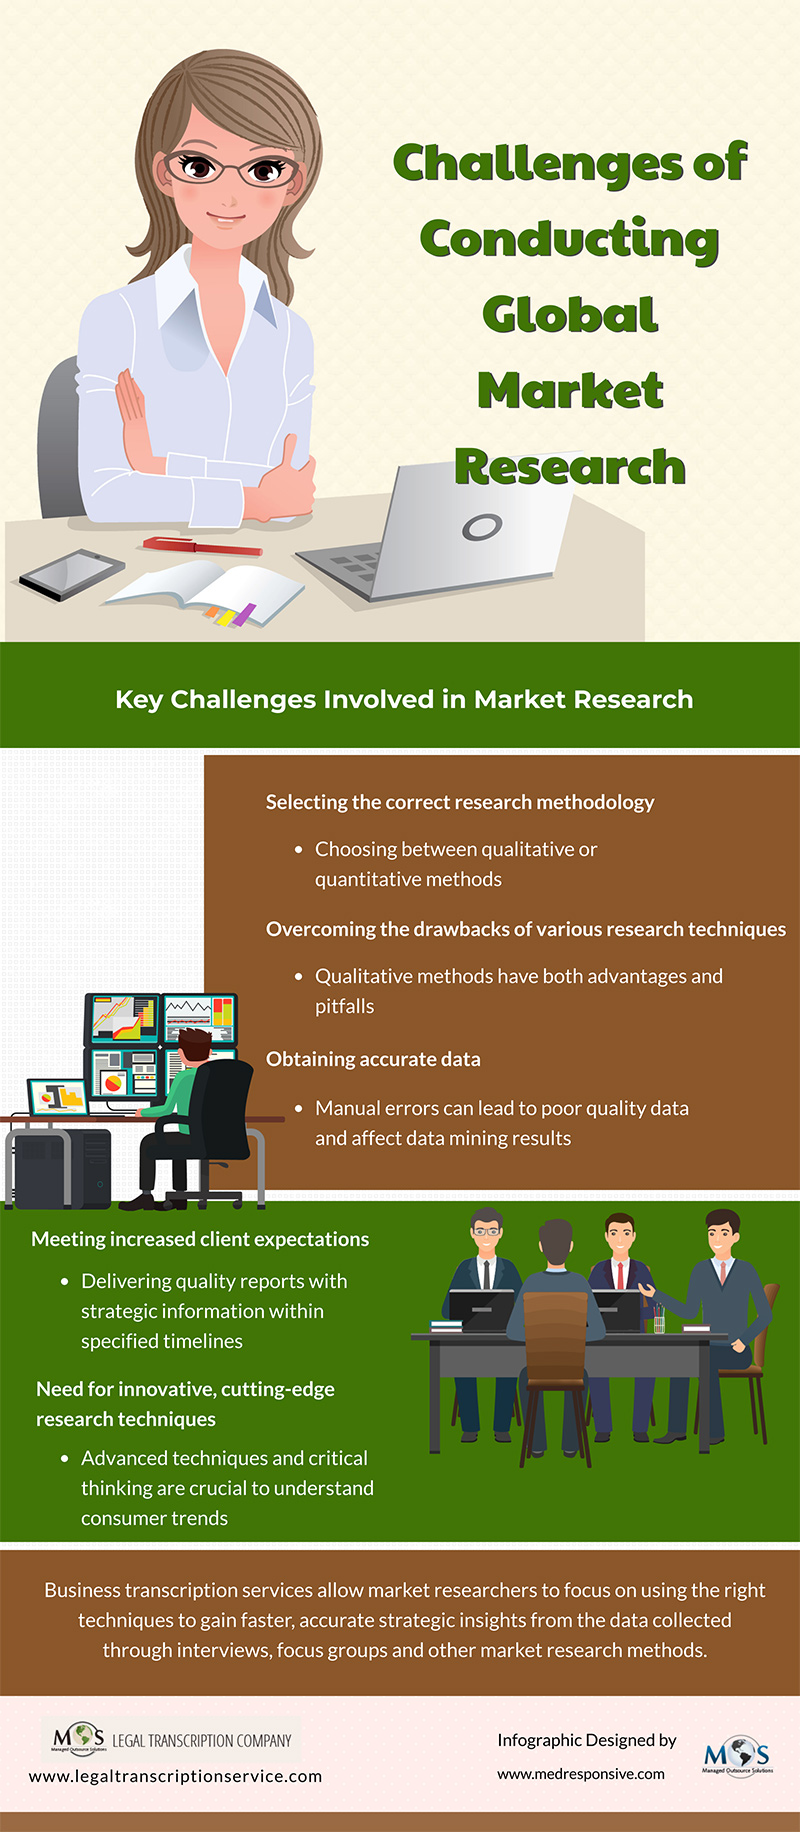 Global Market Research